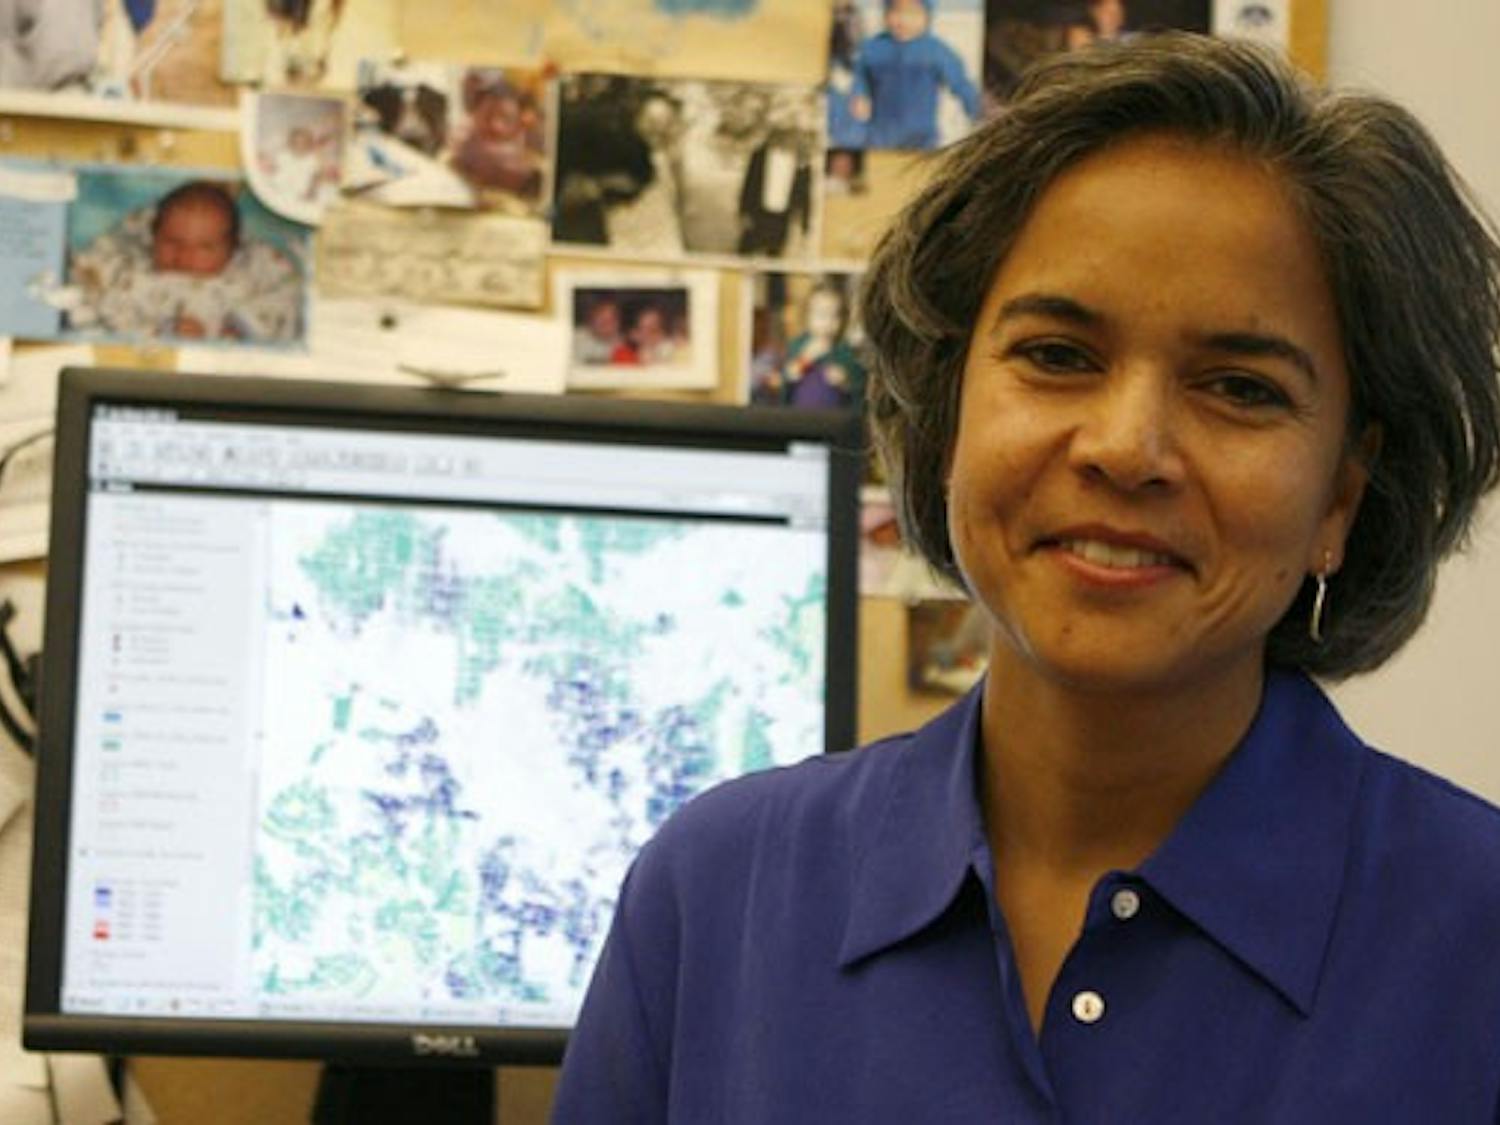 Marie Miranda, director of the Children’s Environmental Health Initiatve, found that lead negatively impacted test scores of children in poor neighborhoods because of their living conditions.